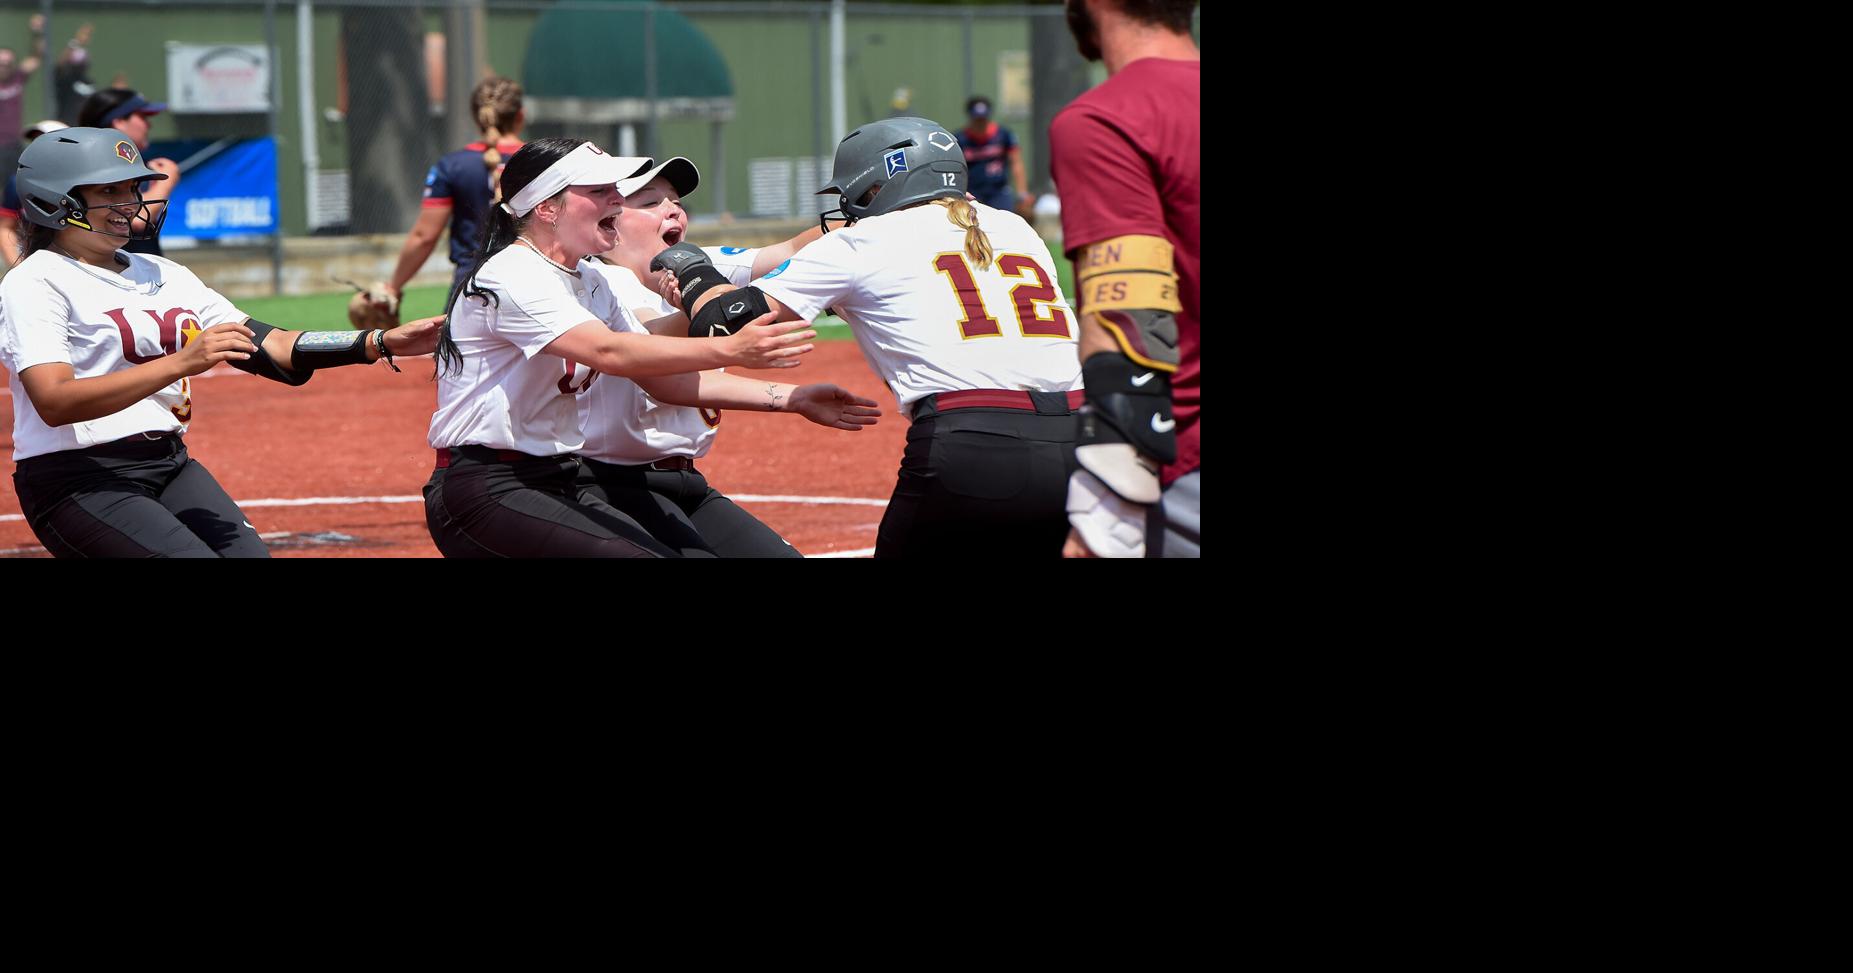 NCAA Division II softball UC completes another stirring comeback, wins